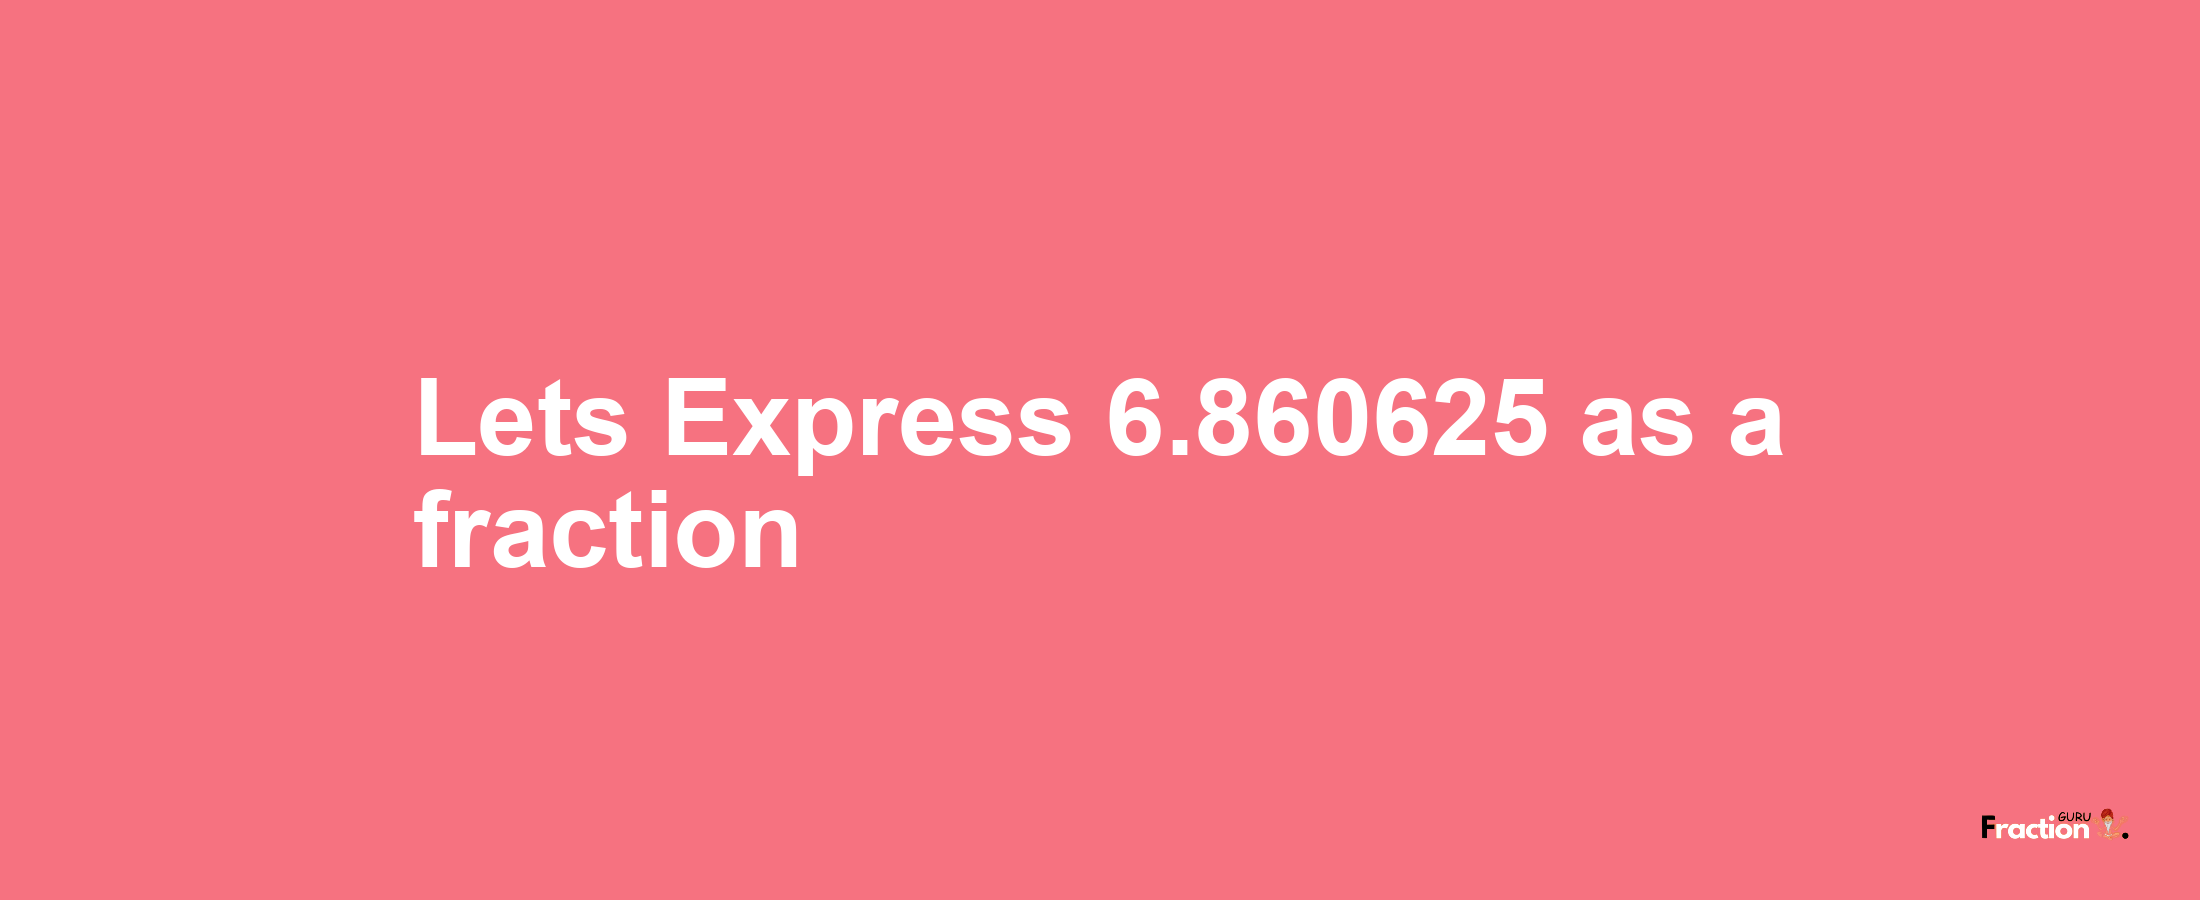 Lets Express 6.860625 as afraction